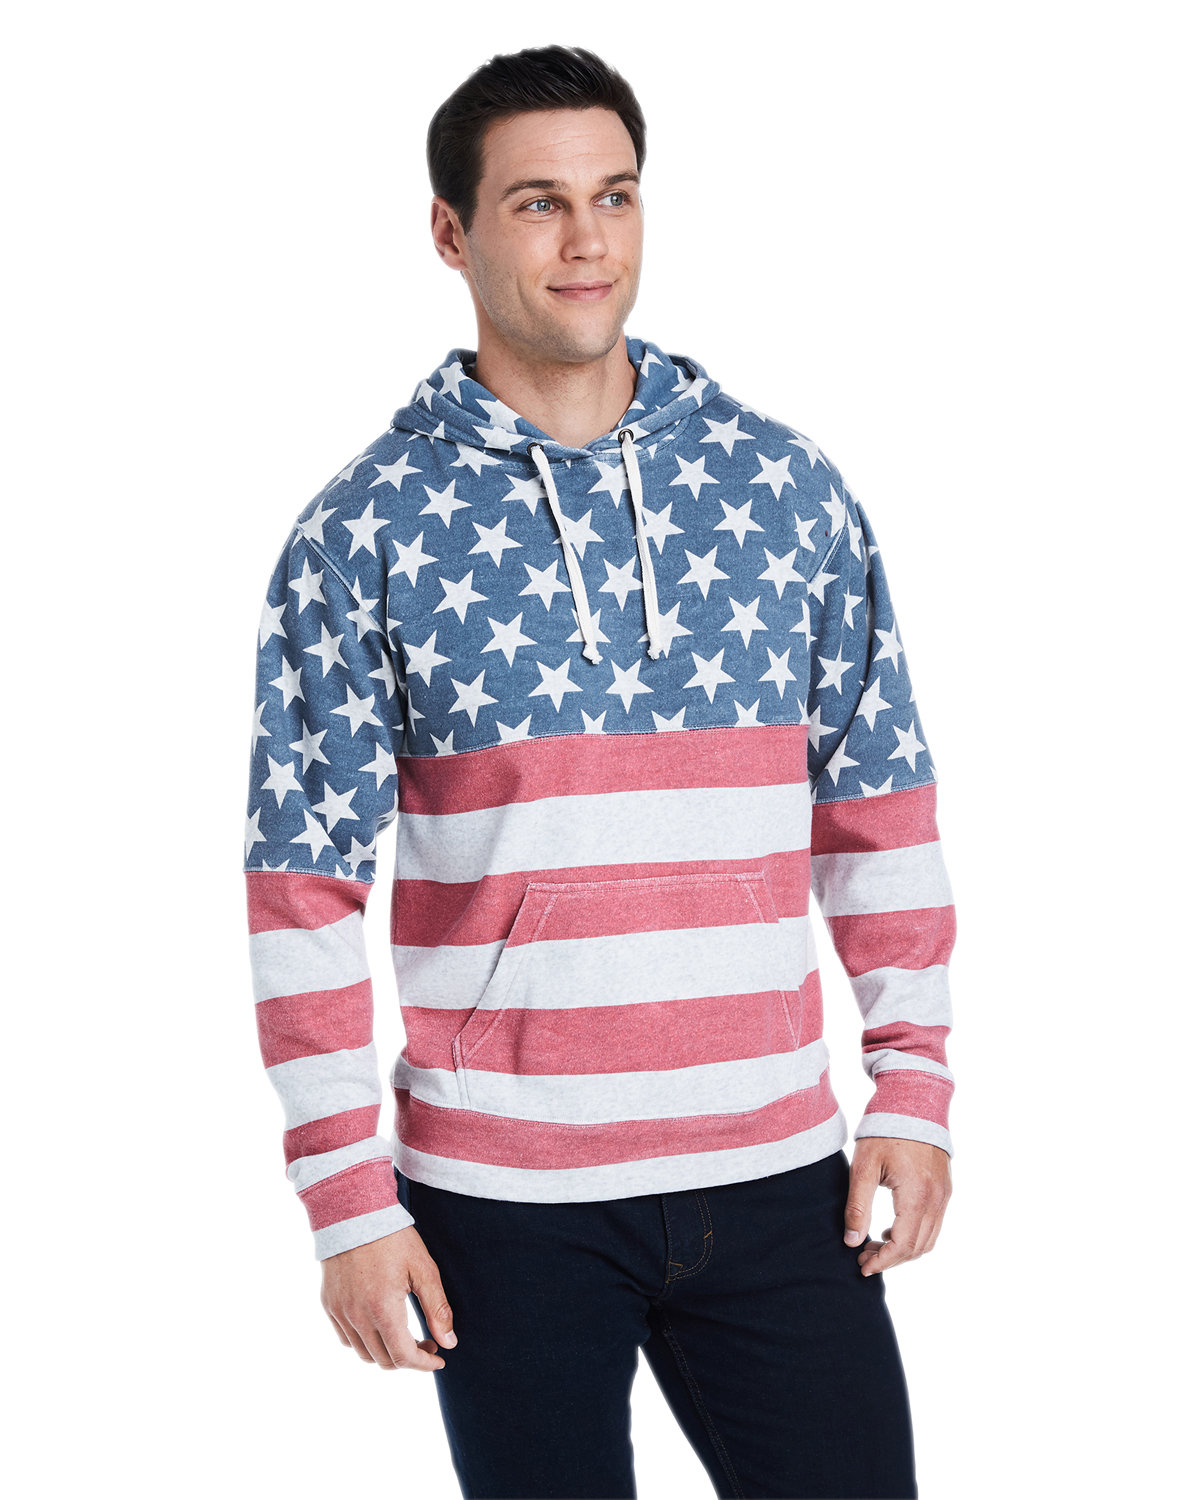 click to view Stars & Stripes Triblend